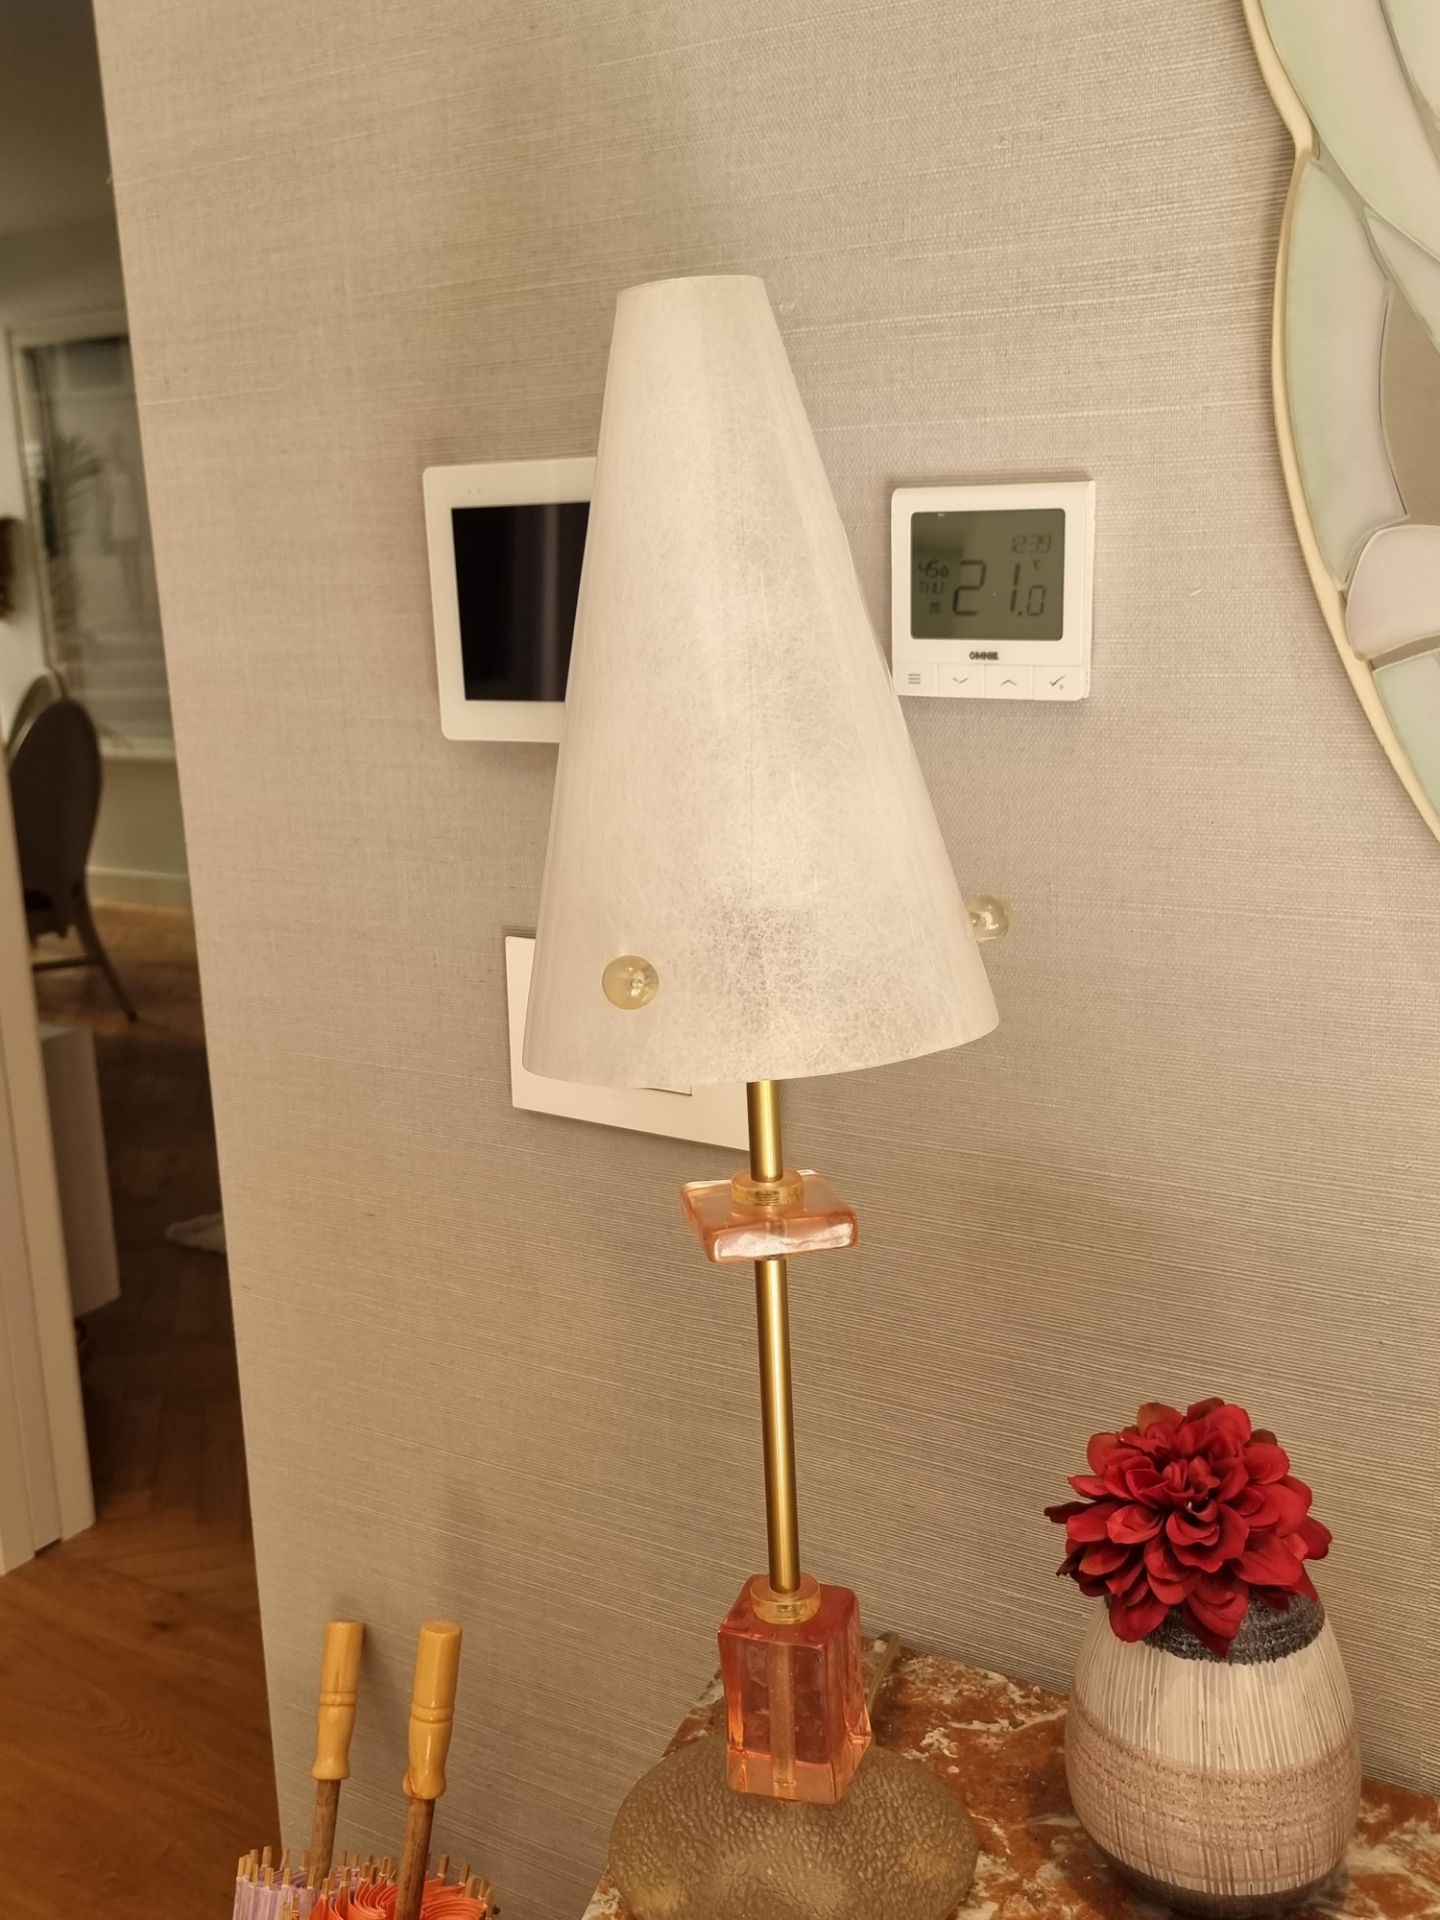 Robert Sonneman Style 1980s Table Lamp - a whimsical and stylish addition to any space. Imported - Image 4 of 4